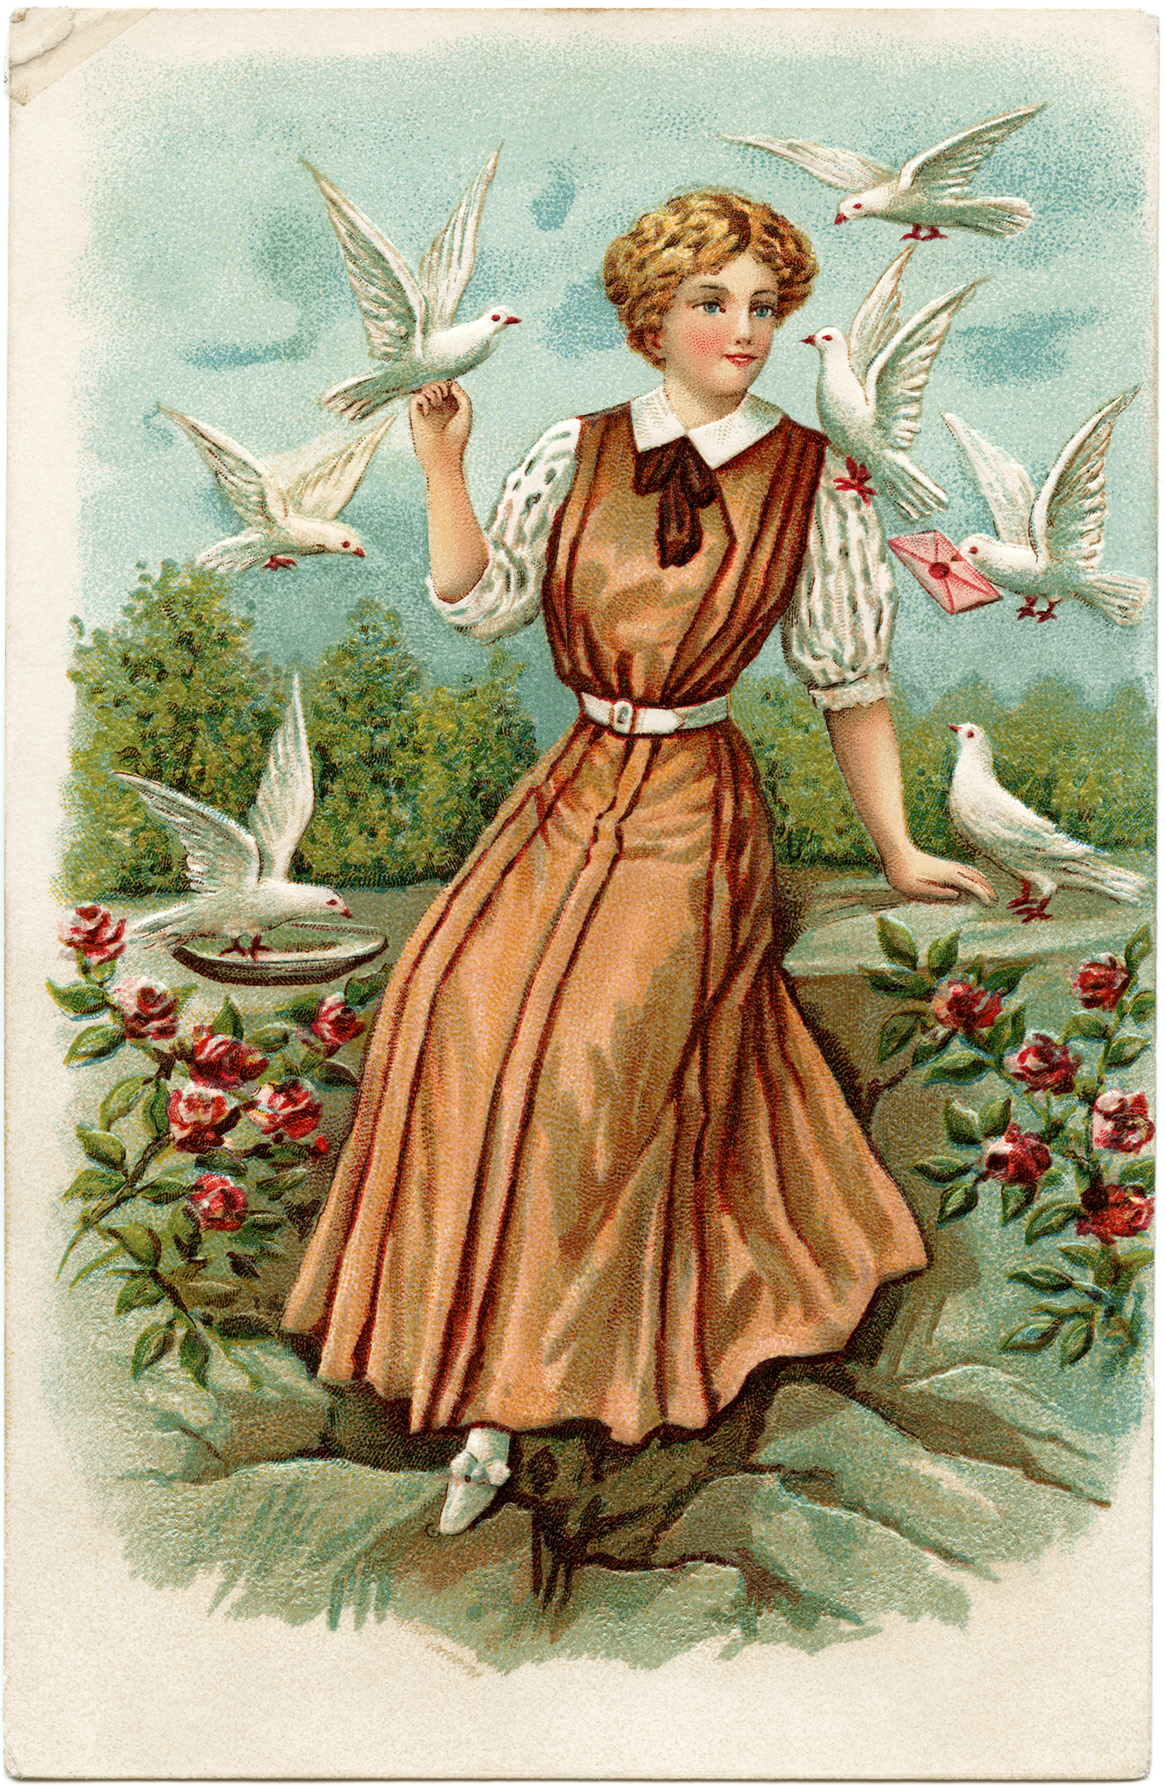 Free vintage clip art lady with white doves in garden postcard image.